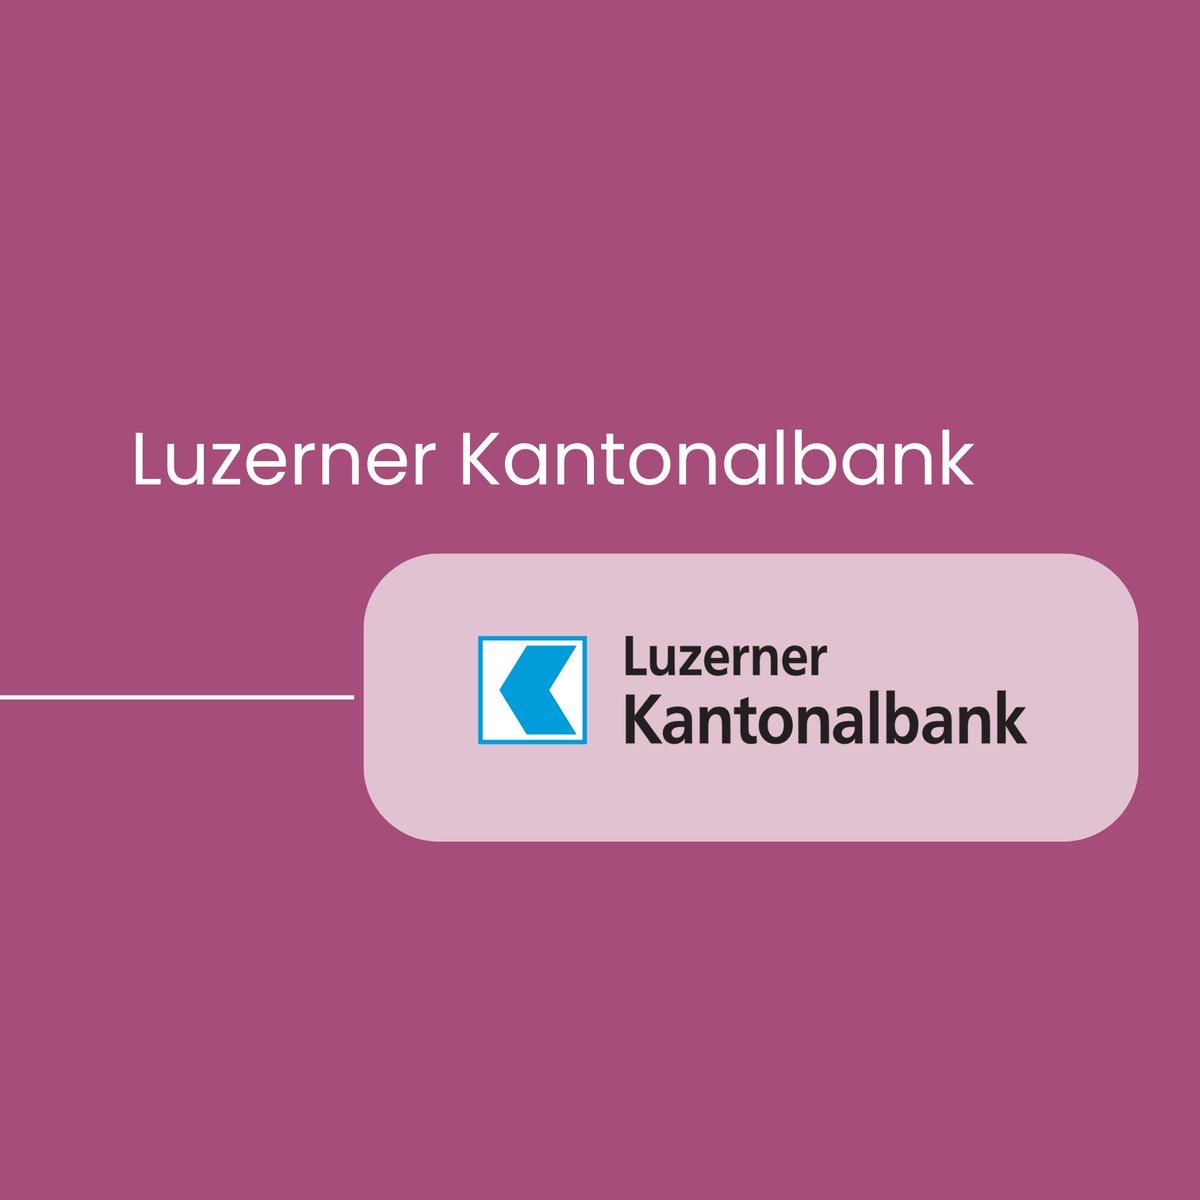 6/ 💡Luzerner Kantonalbank @LuzernerKB
Its collaboration with leading crypto service providers, including Sygnum Bank, Fireblocks, and Wyden, offers a fully integrated solution for the custody and transaction monitoring of crypto assets.

#cryptobanks #swisscrypto #crptoinvest